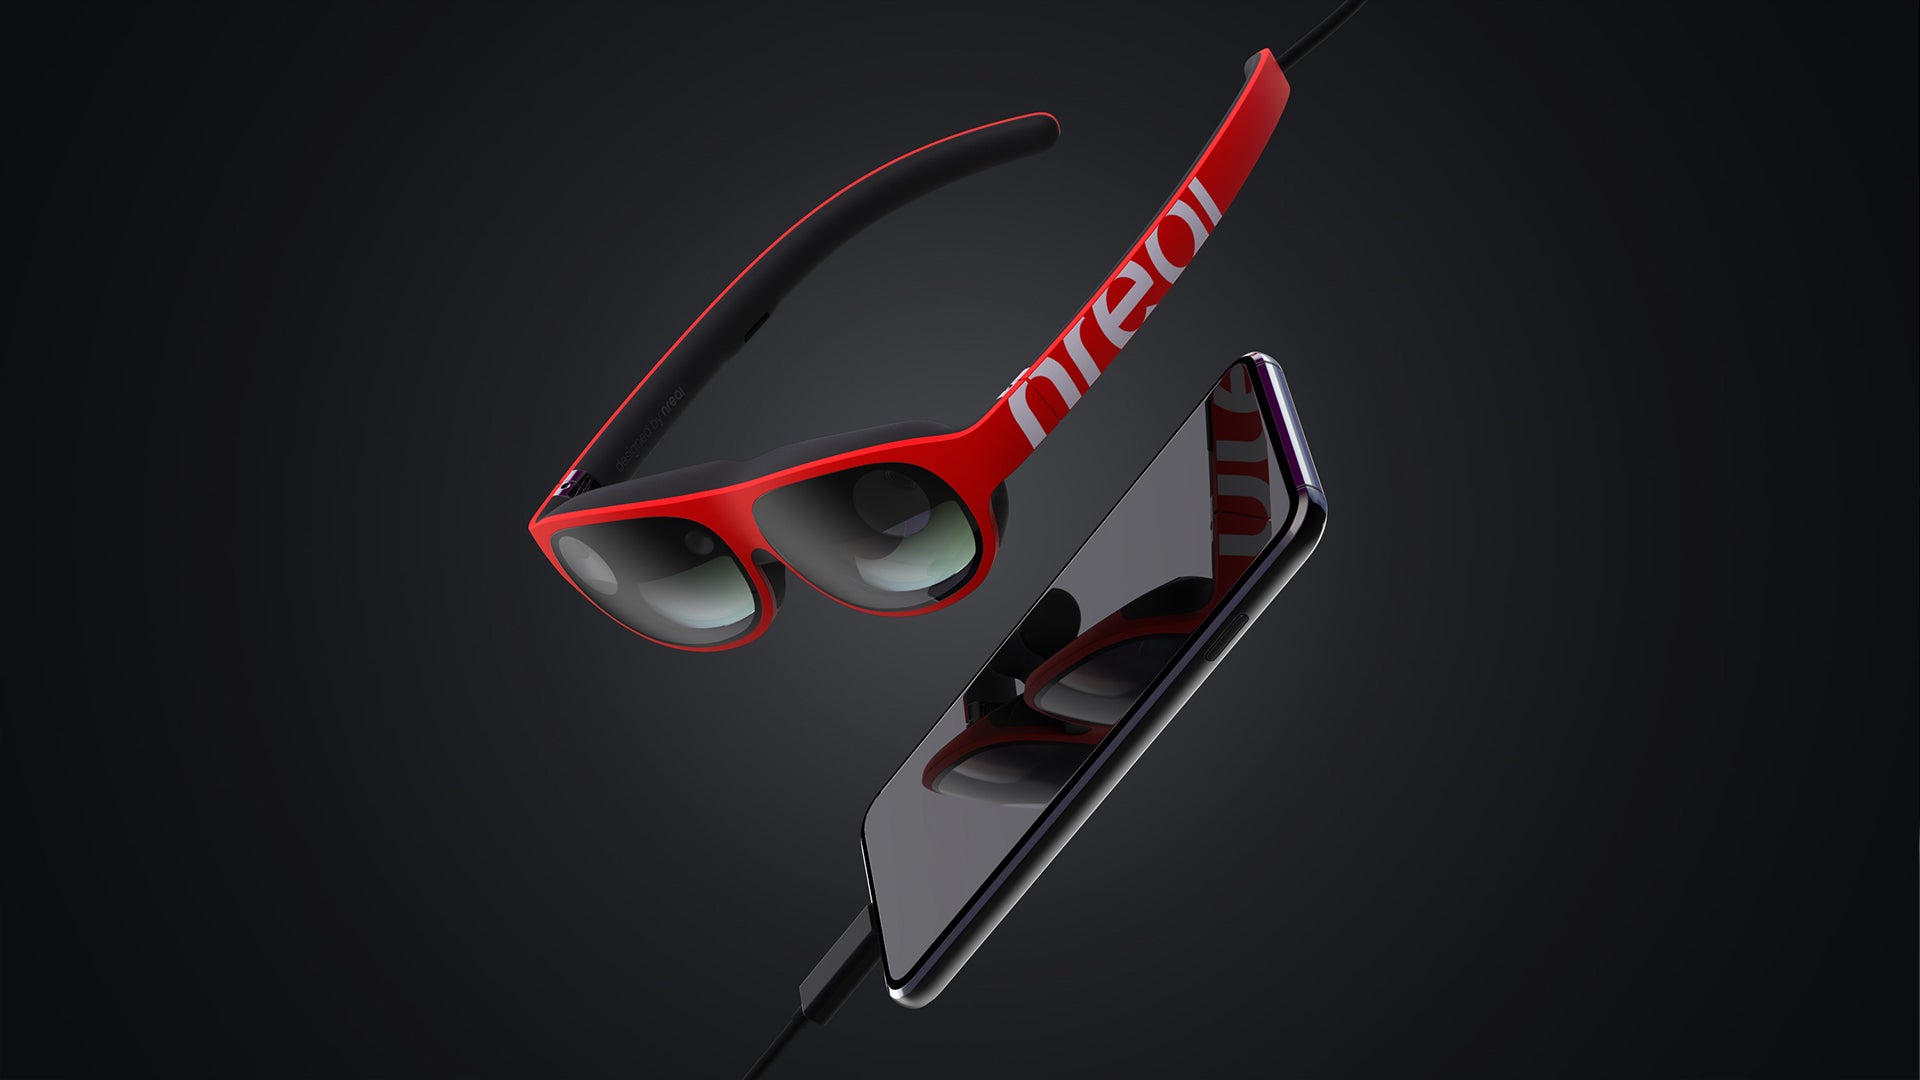 Nreal Air glasses here may not be popular, but when Apple and Samsung release something like this - get ready for a cultural shift - these 3 huge smartphone and tablet breakthroughs didn't happen in 2022, but likely in 2023!